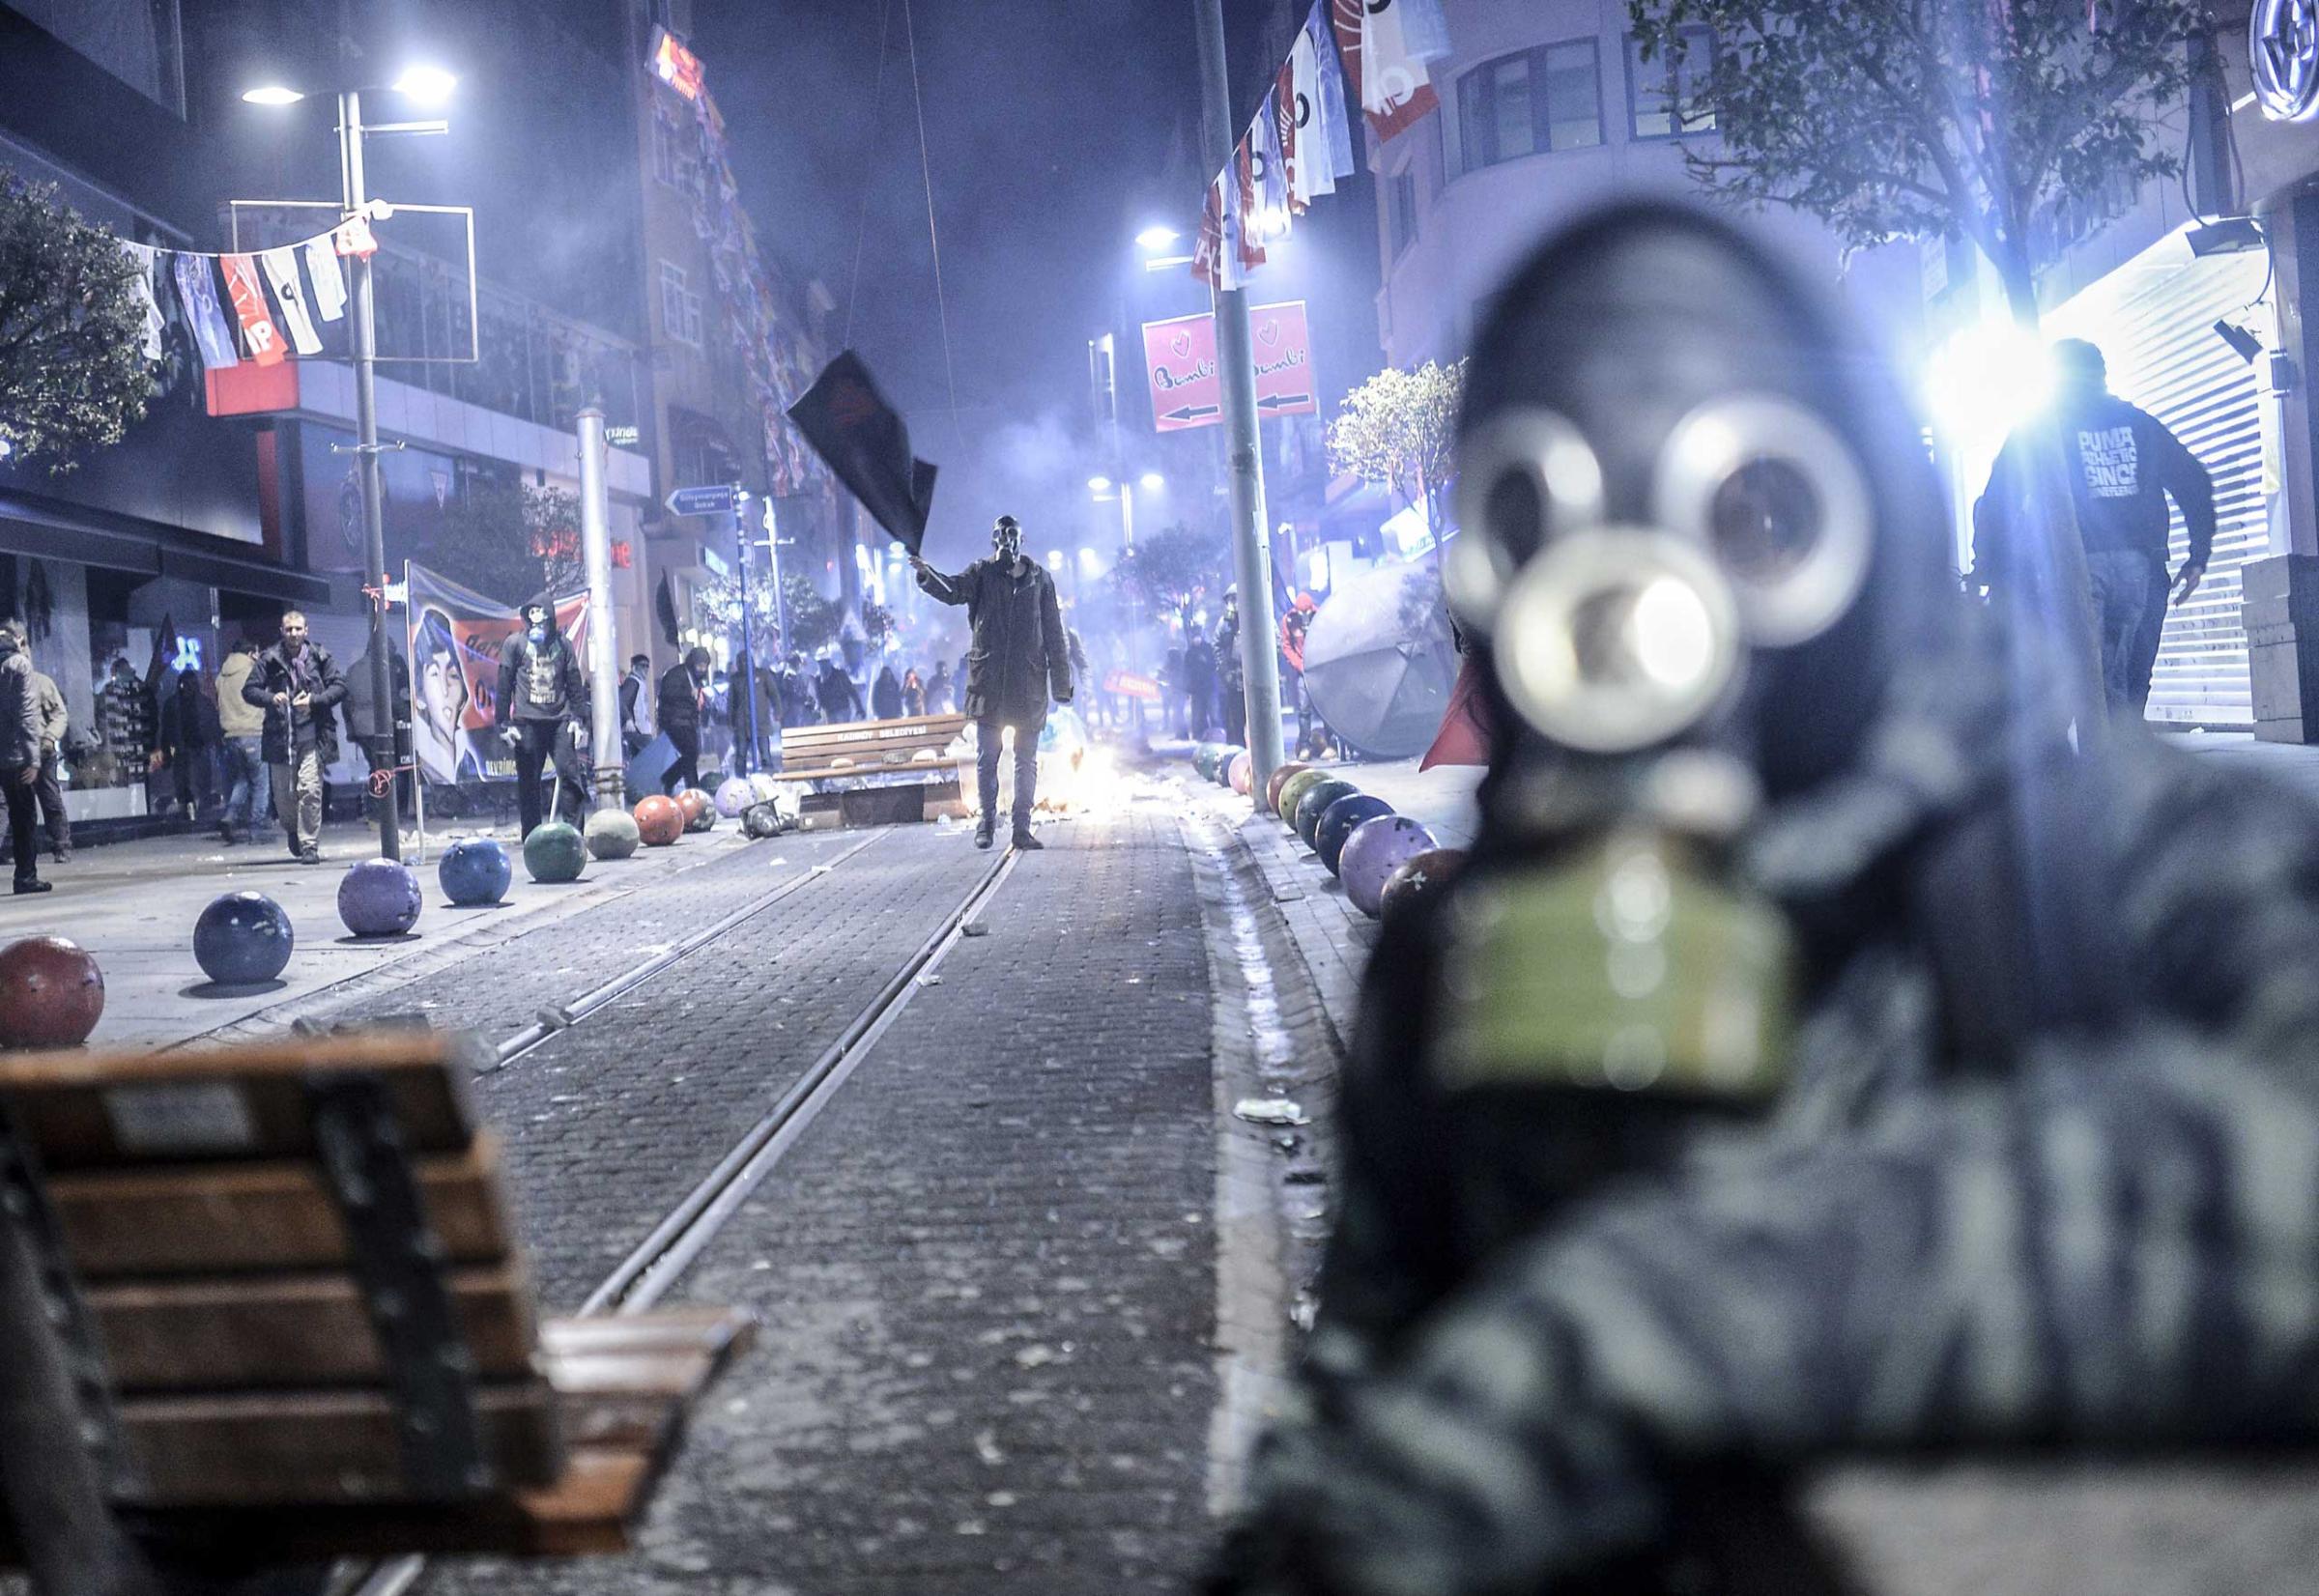 A protester waves a black flag during clashes with riot police in Kadikoy, on the Anatolian side of Istanbul, on March 11, 2014.